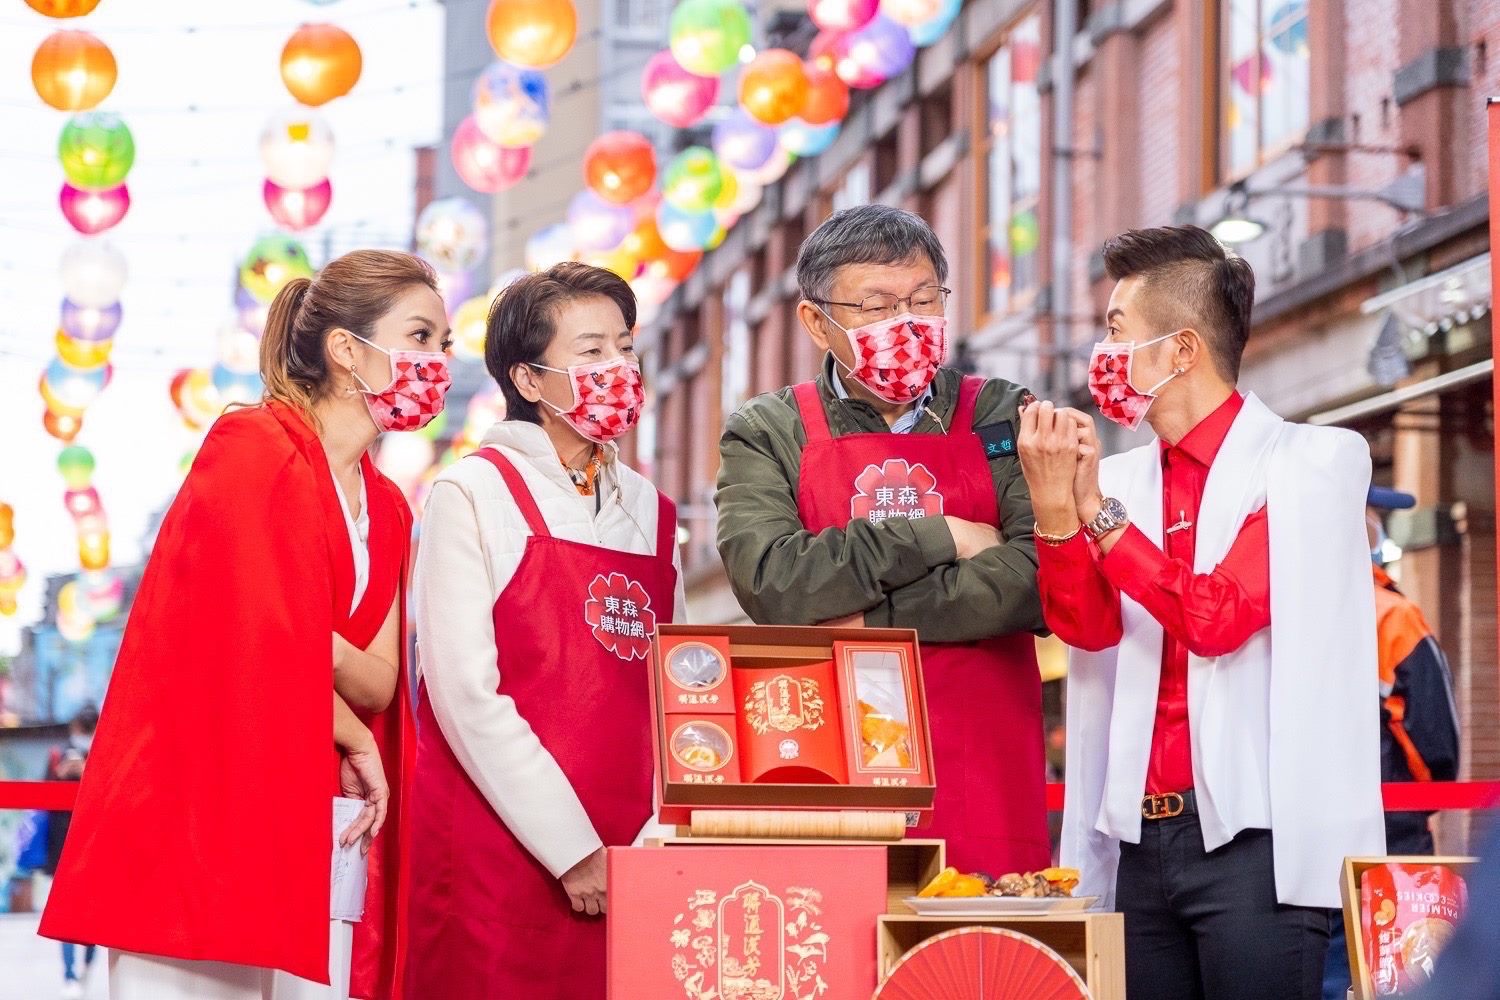 Taipei CNY Gift Sets for Informercial Collaboration are promoted by the Mayor and Deputy Mayor. (Photo / Provided by Taipei City Government)